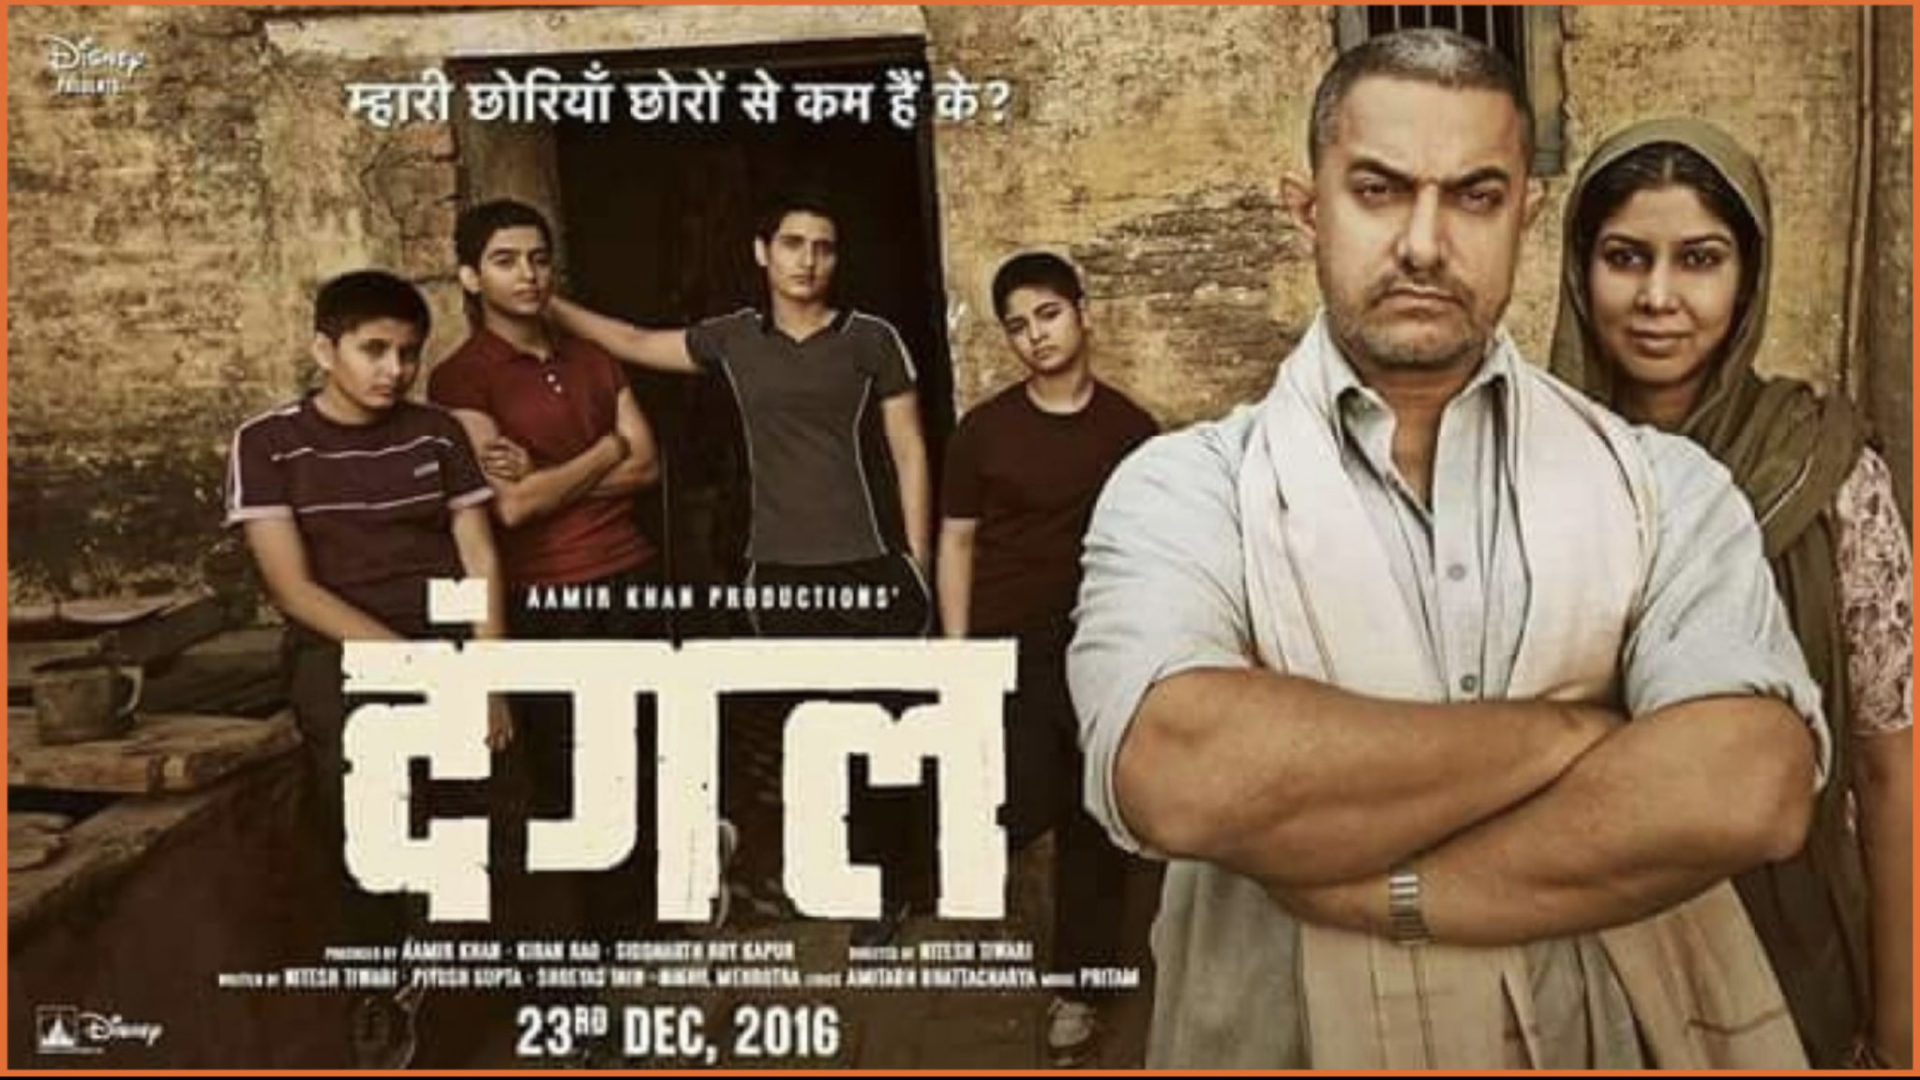 20 Lessons From The Movie Dangal - FocusU